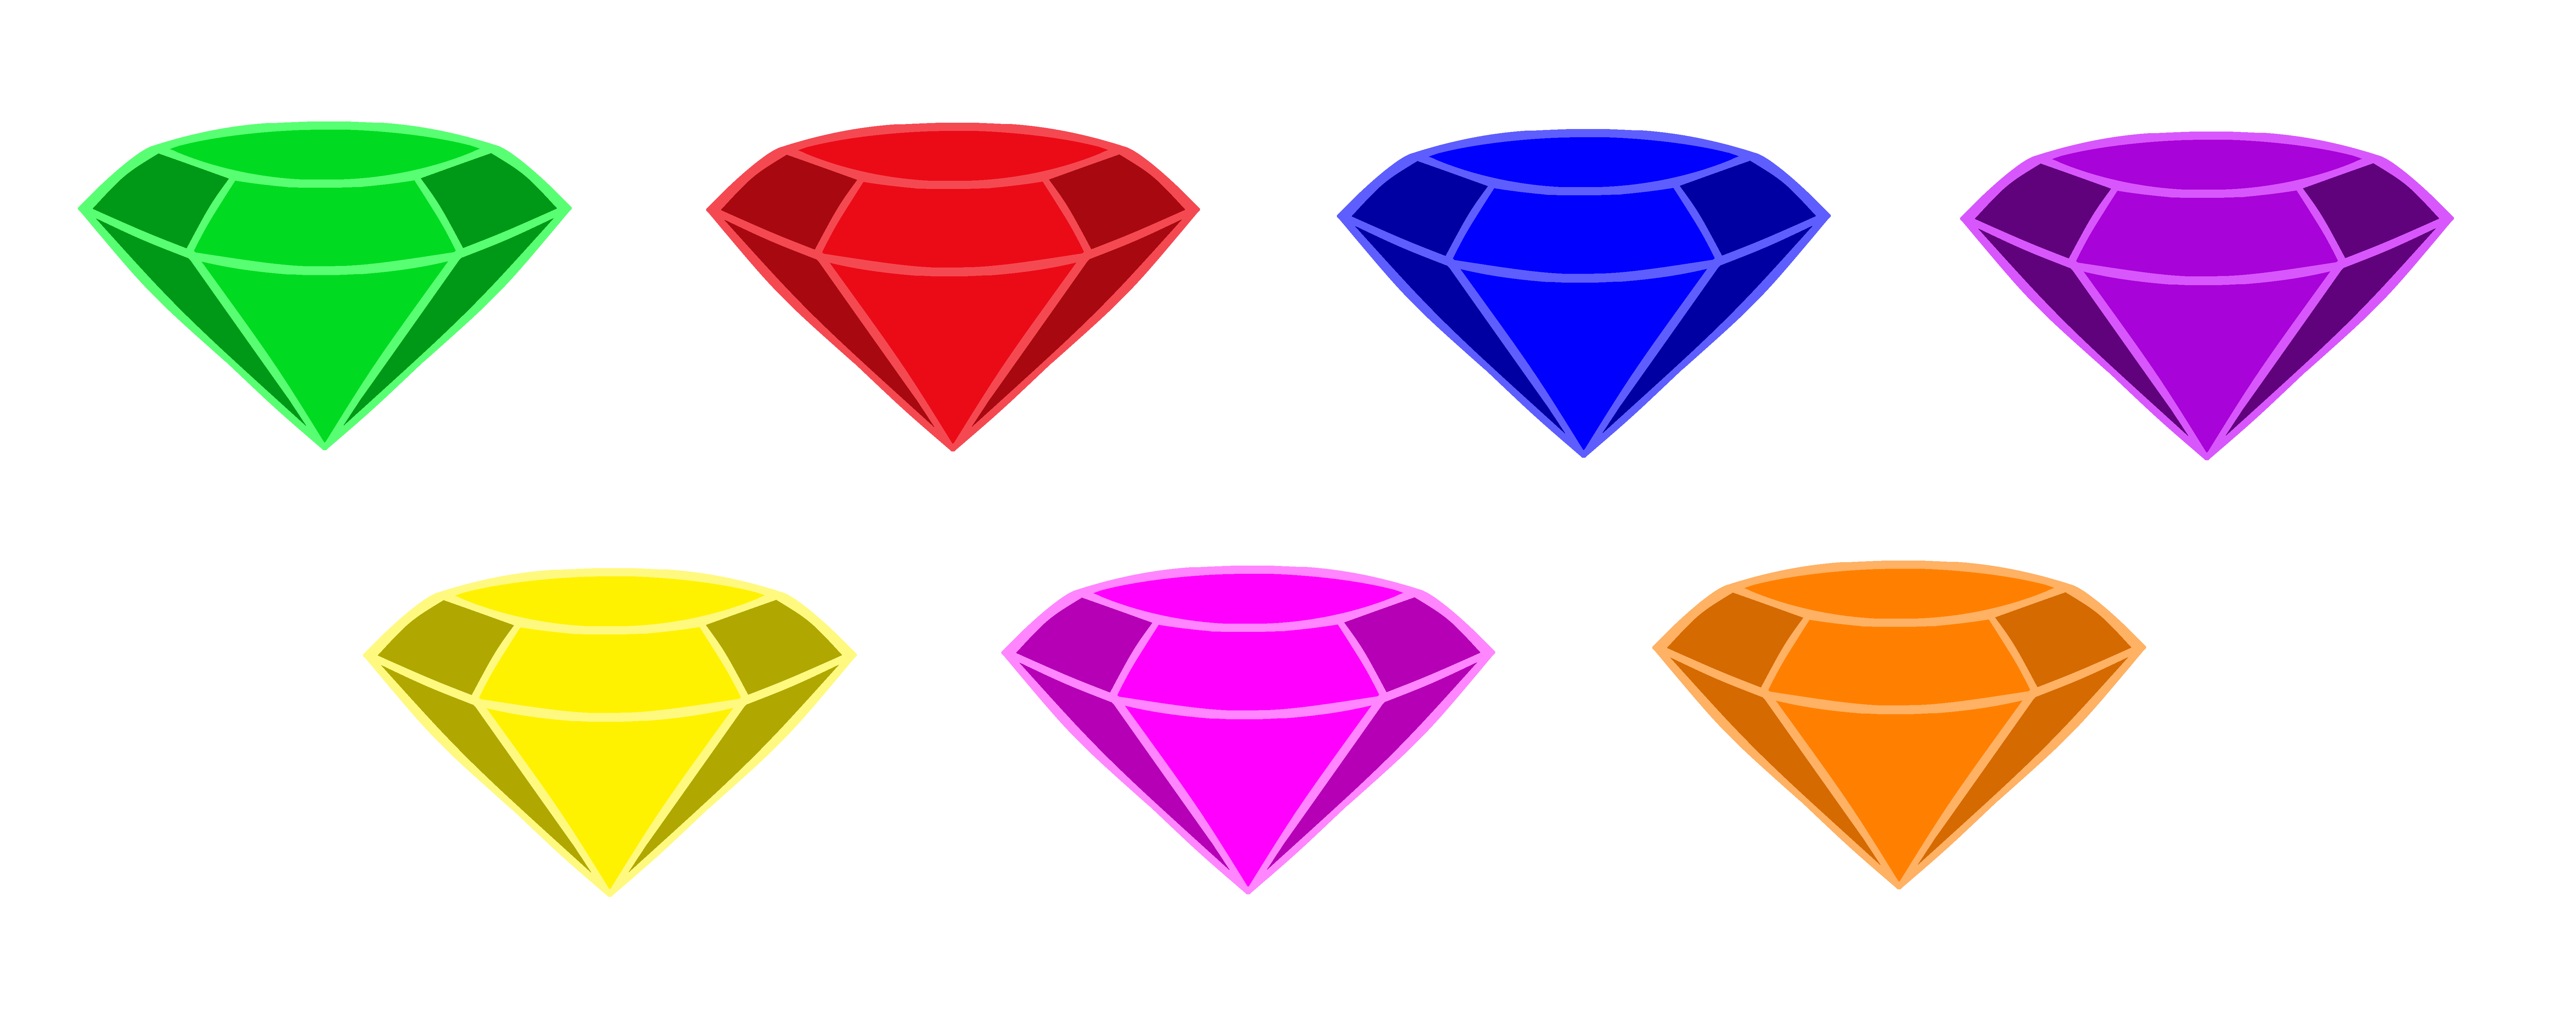 How To Draw Chaos Emeralds - Memberfeeling16